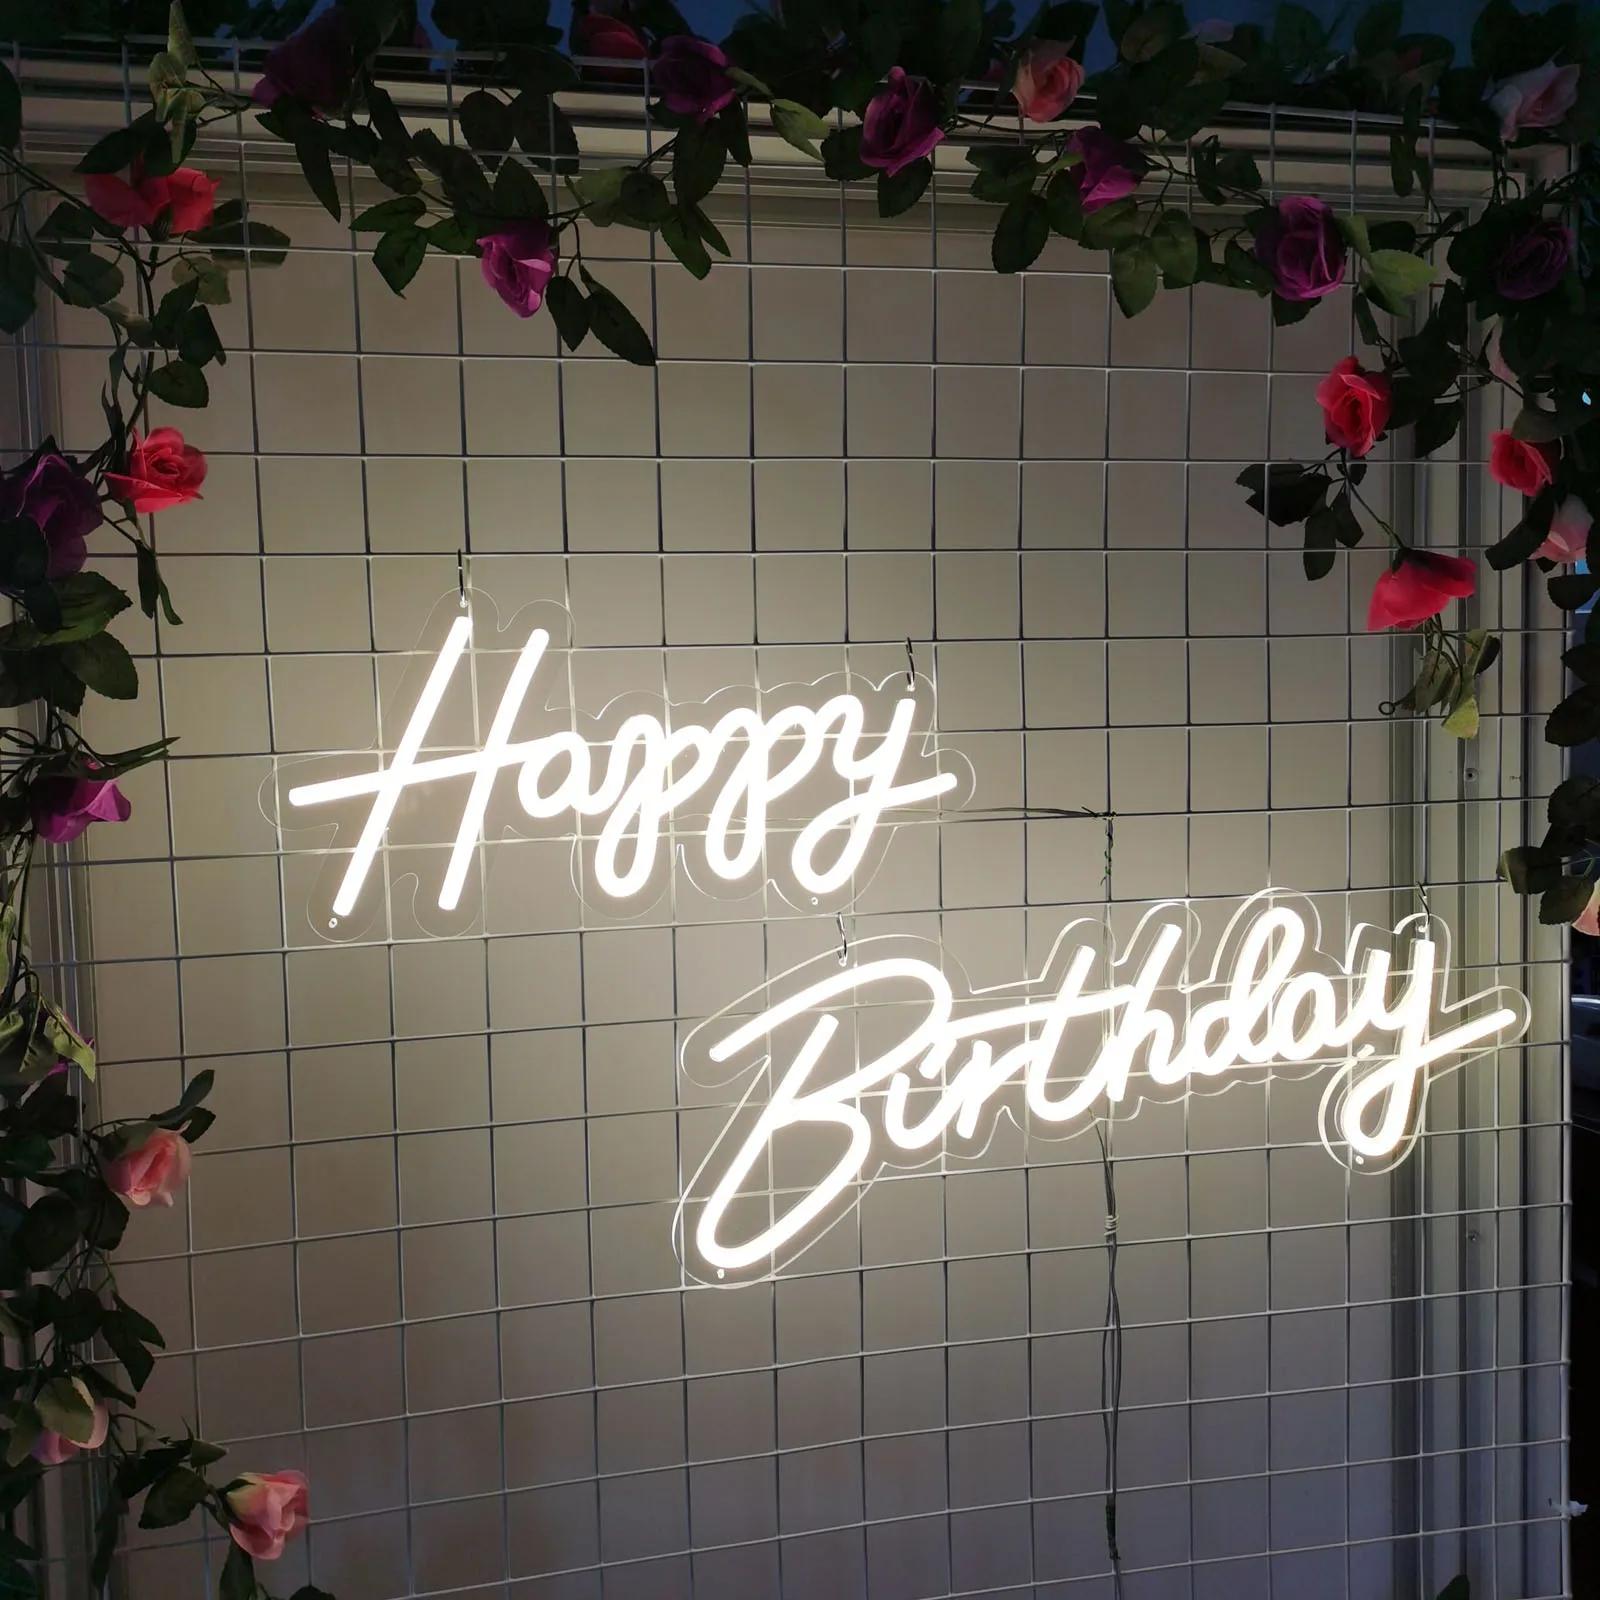 Happy Birthday Led Neon Light Sign for All Birthday Party Decoration Oh Baby Neon Light Sign Wedding Party Decoration